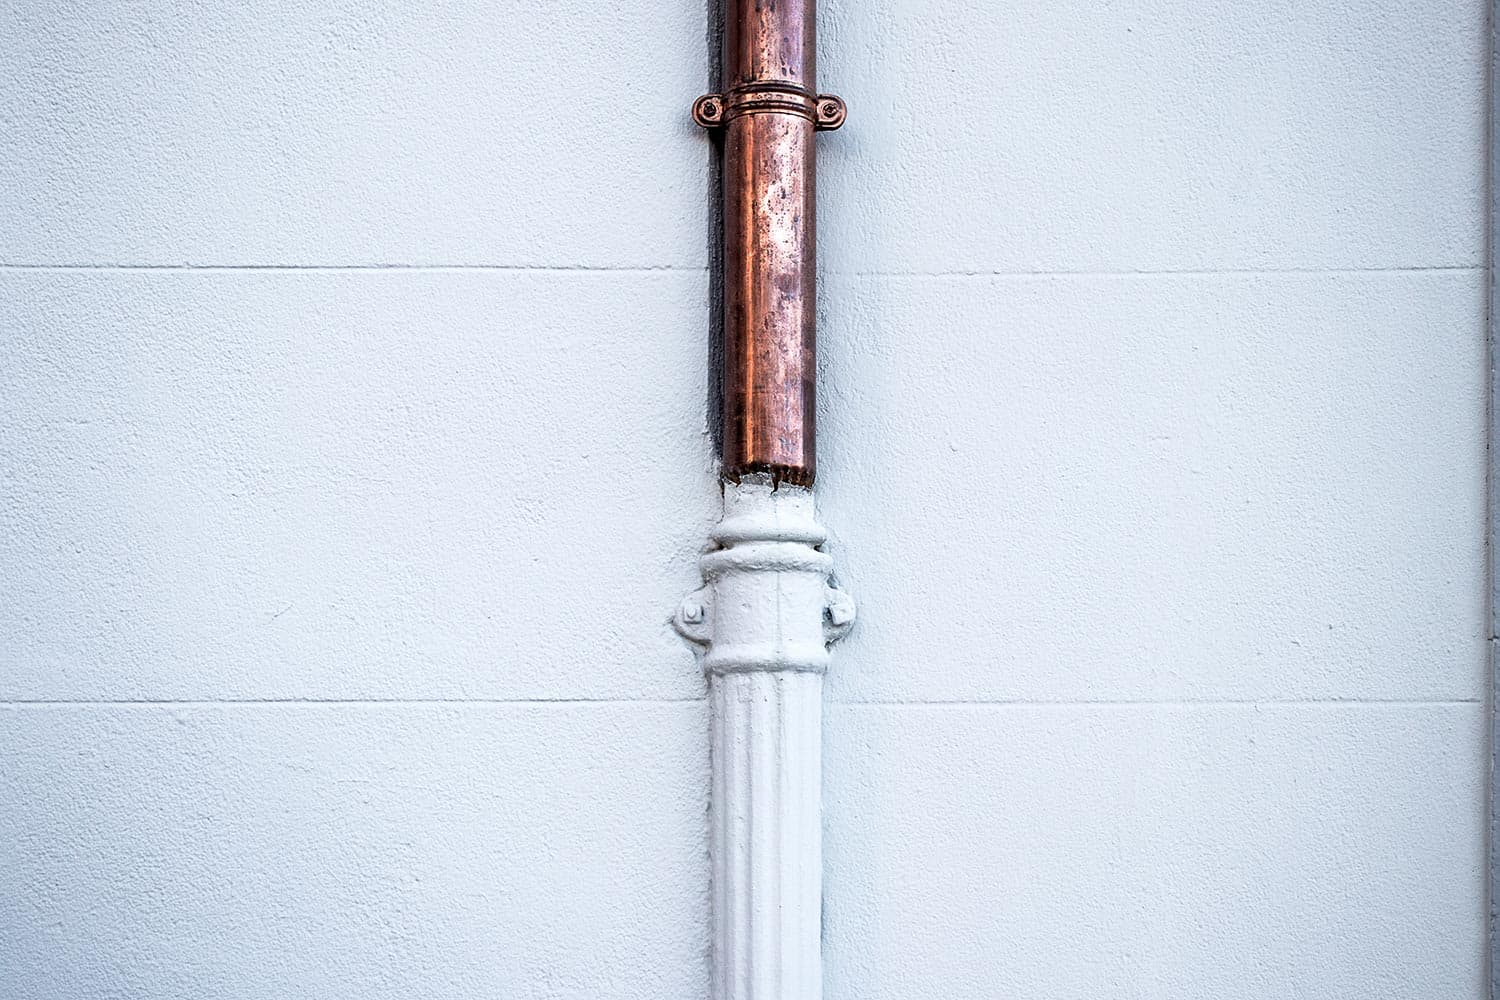 Copper and white painted pipes junction